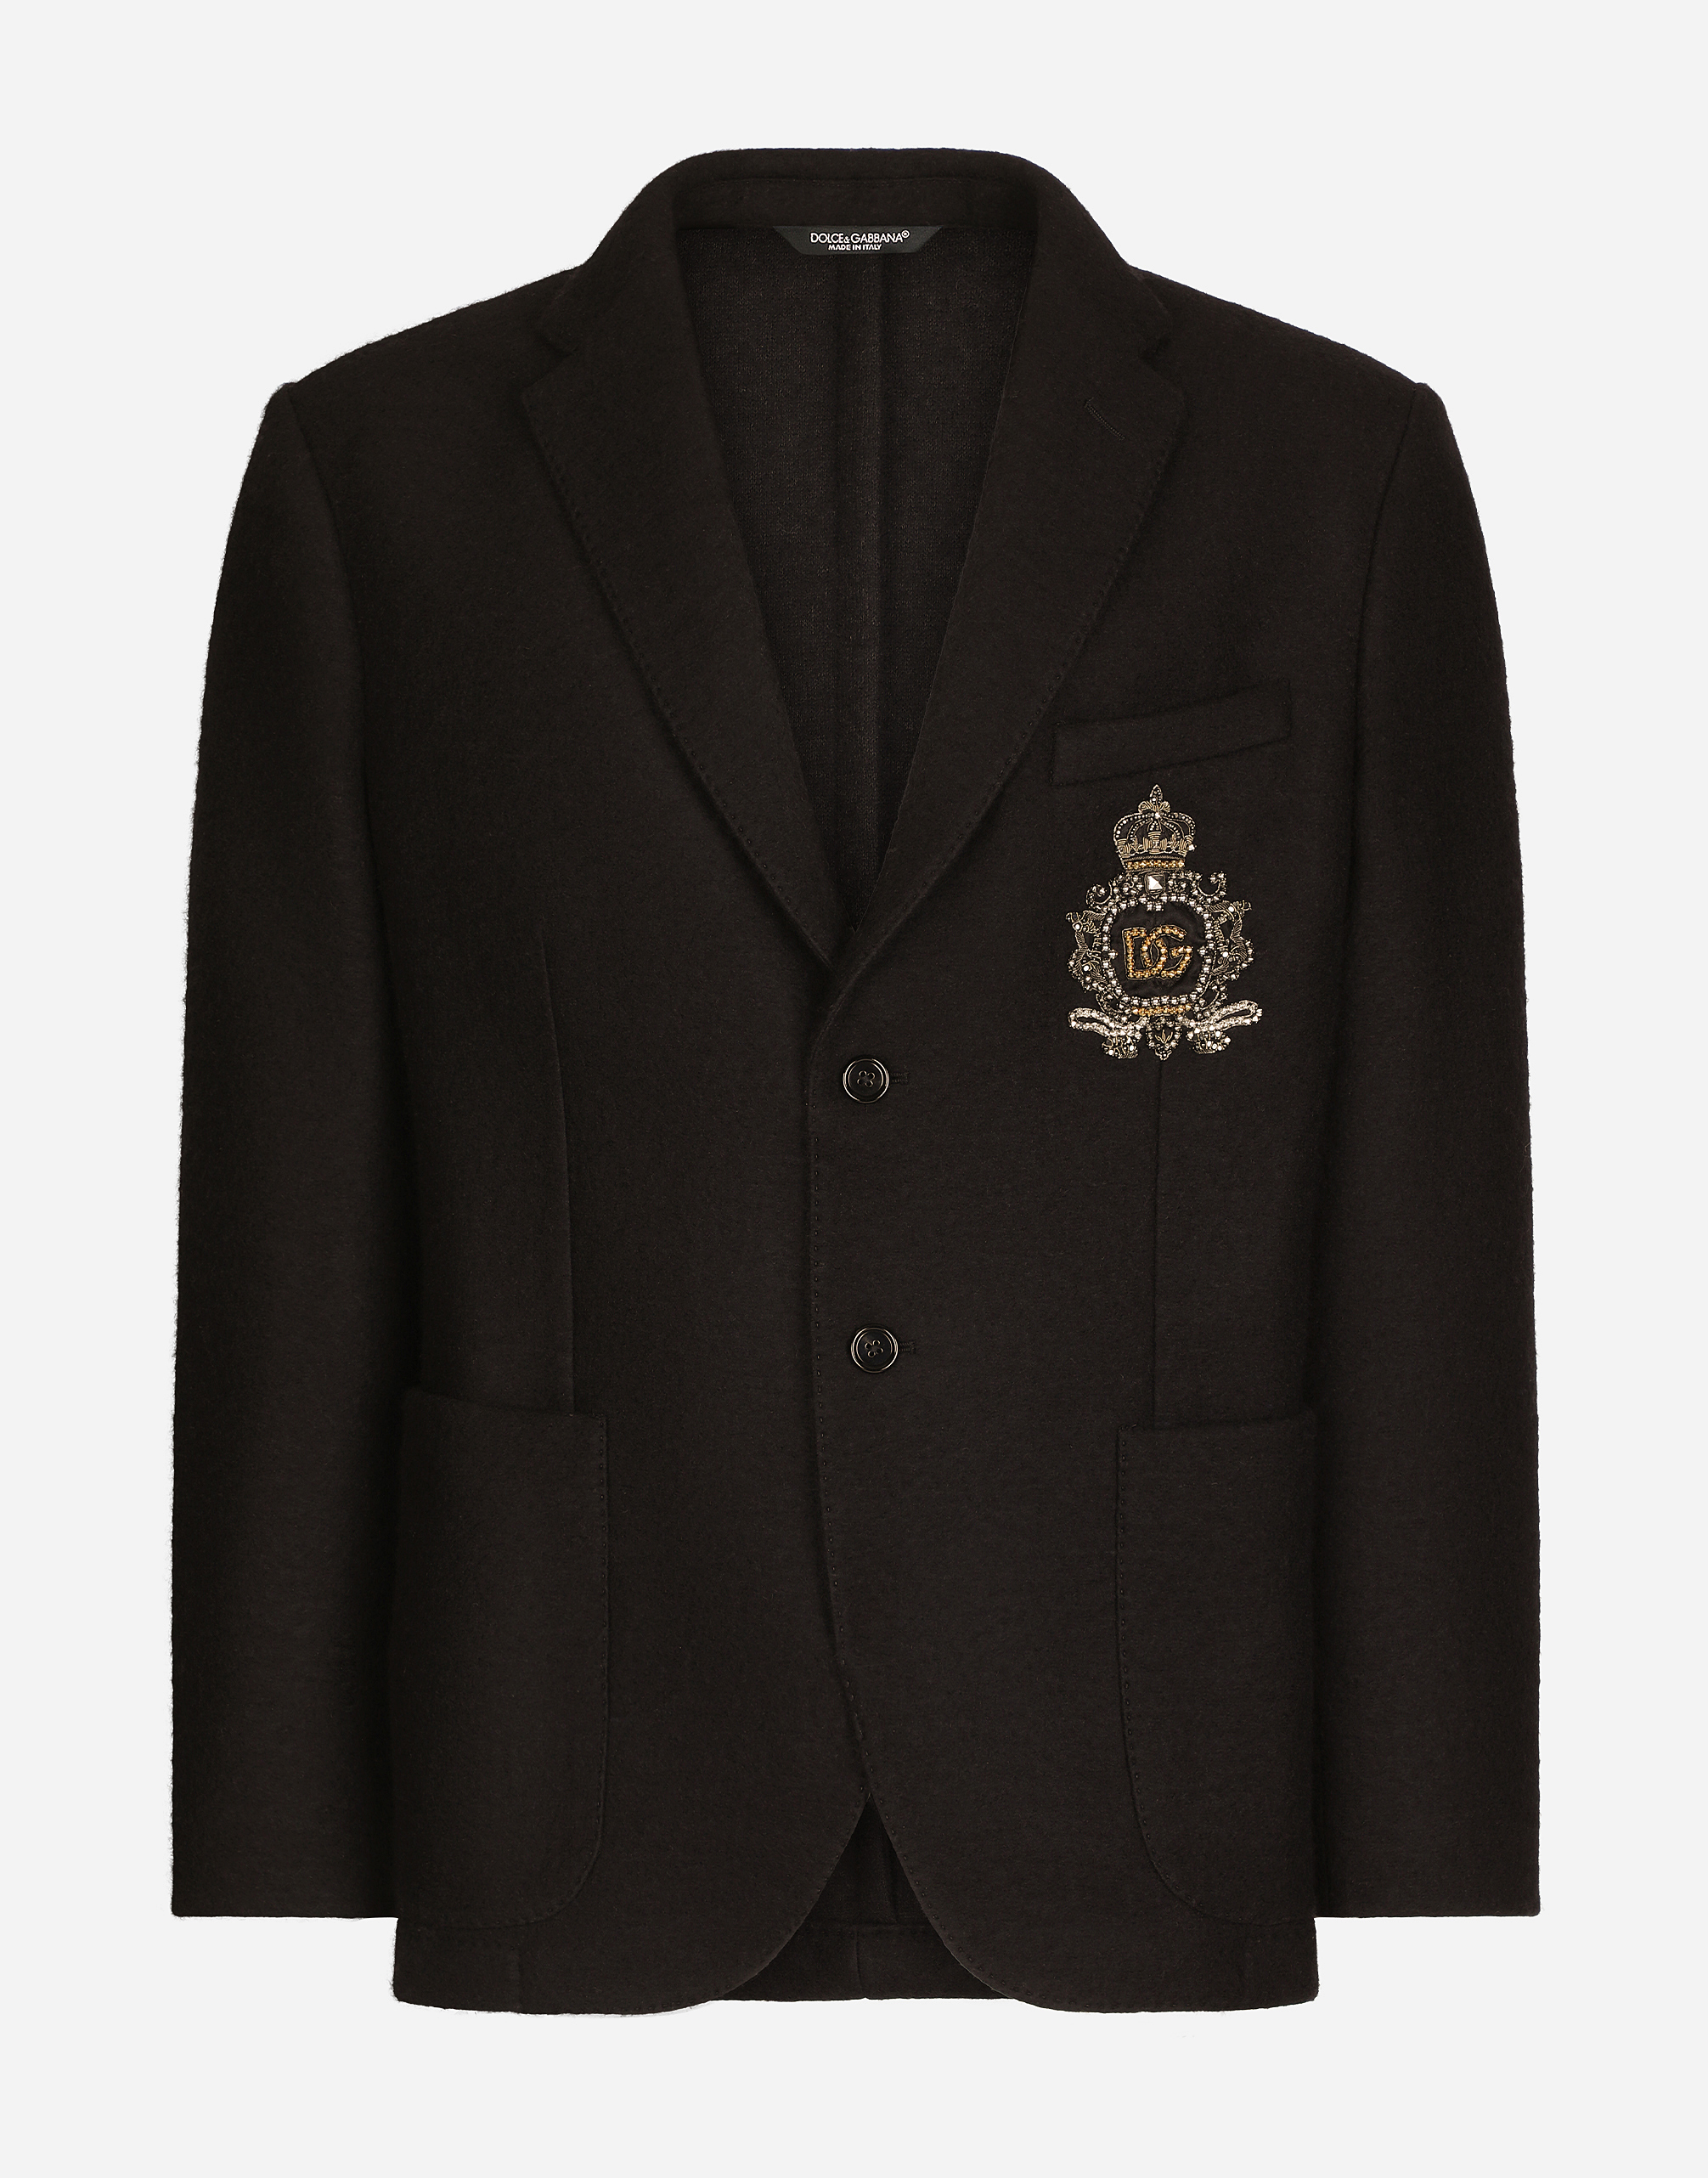 Stretch jersey jacket with heraldic patch in Black